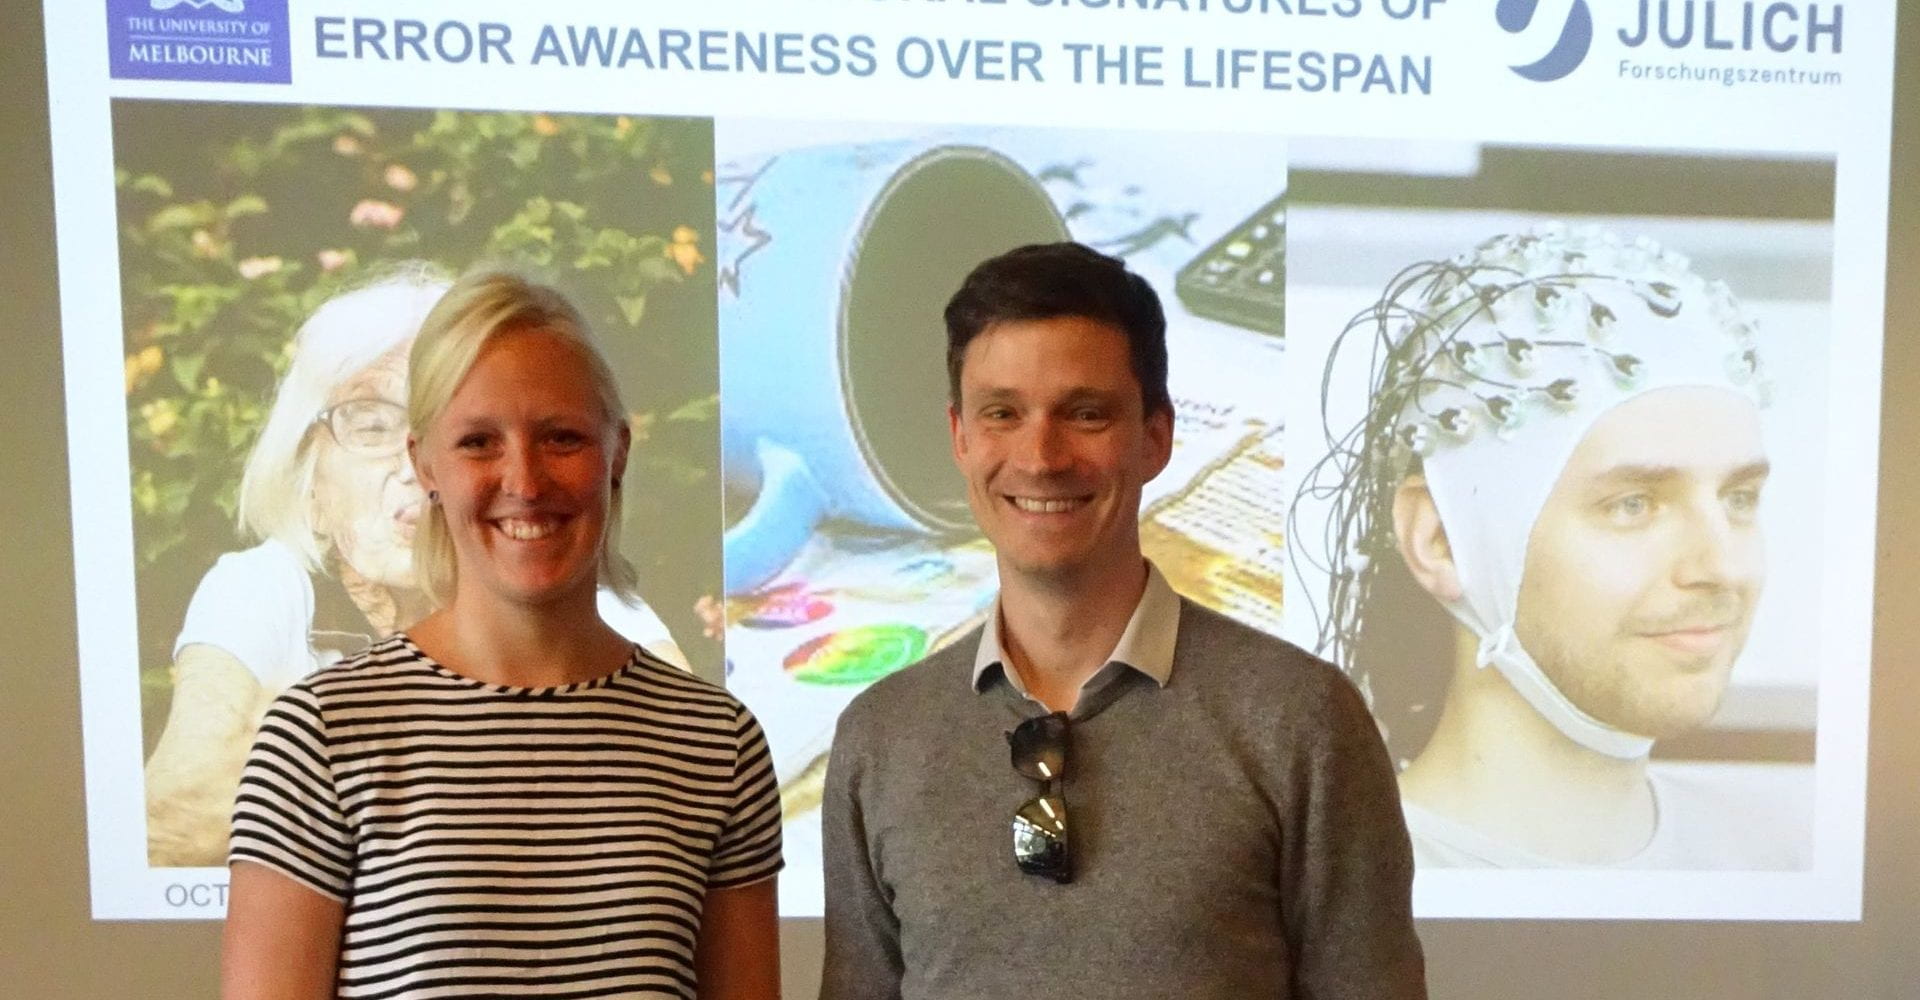 Stefan Bode smiling next to Helen Overhoff with a powerpoint title slide in the background